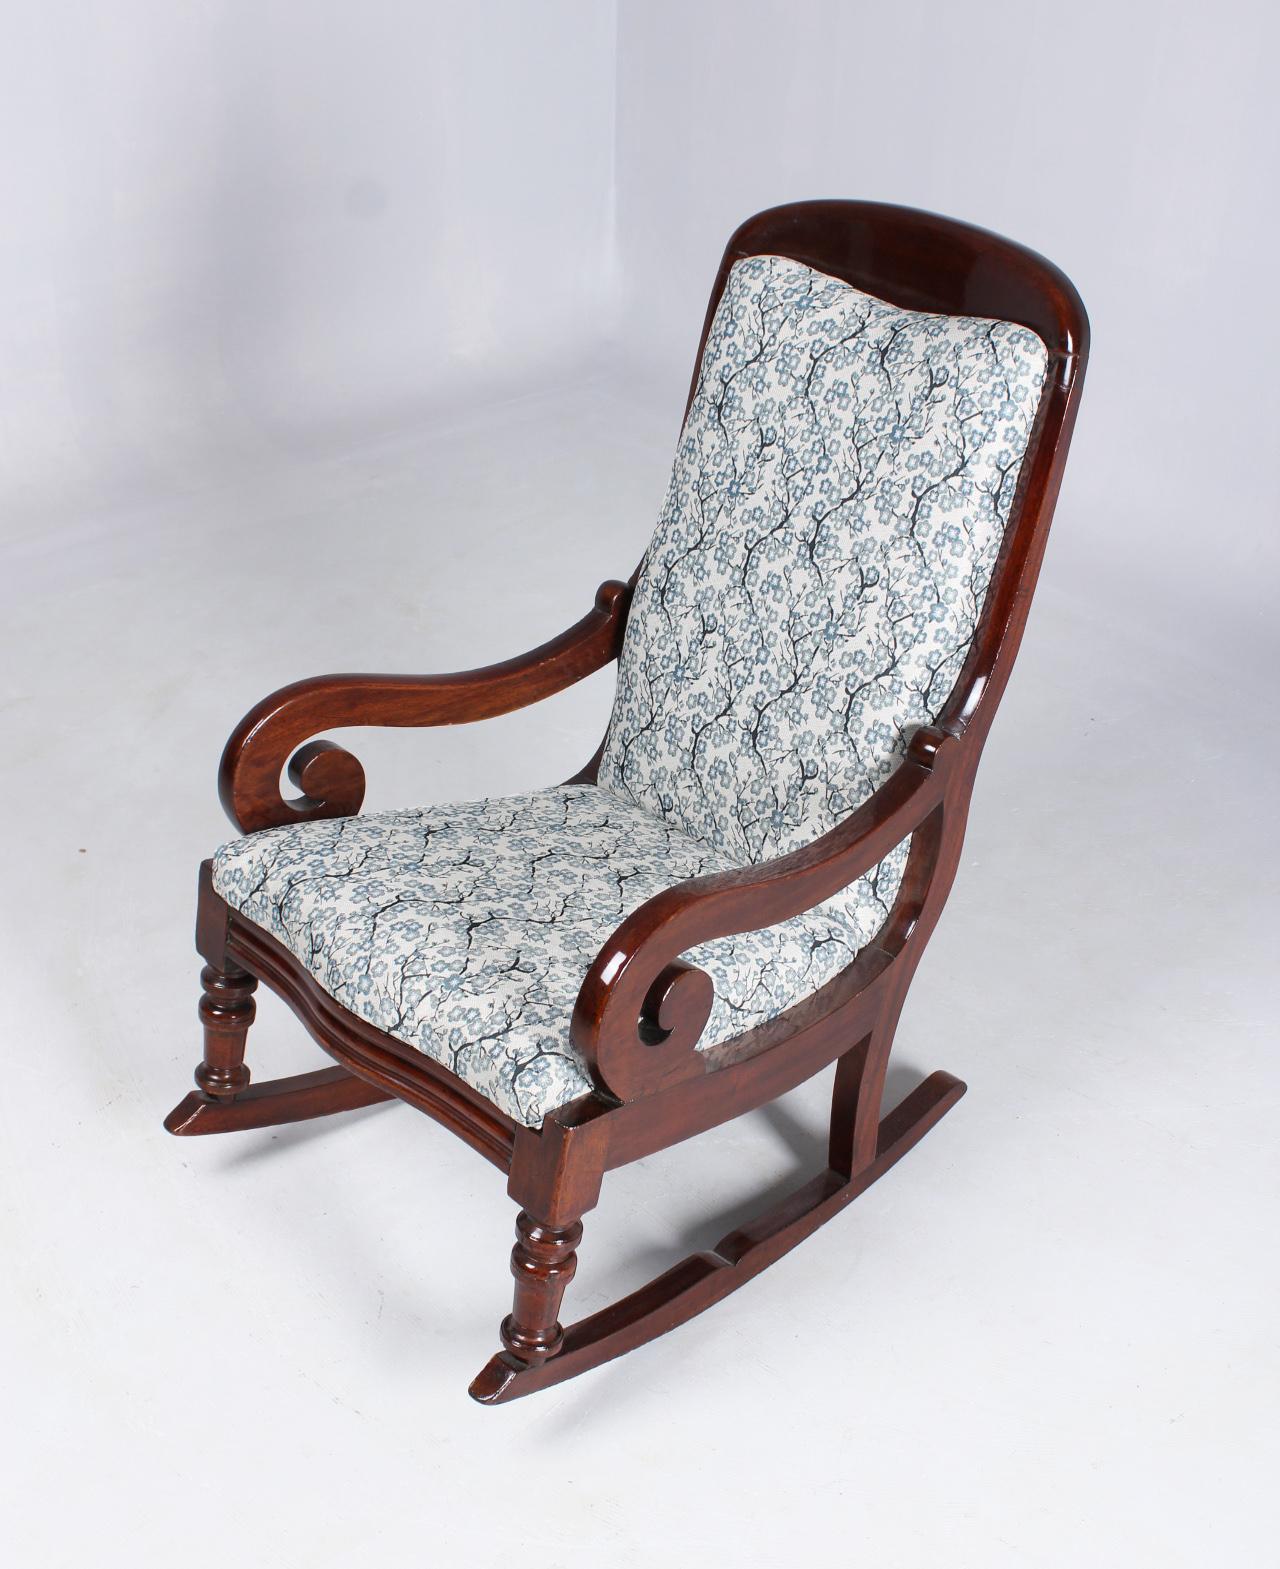 19th century antique rocking chair

North Germany
Mahogany
Late Biedermeier, around 1840

Dimensions:
Height: 97 cm, width: 57 cm

Description:
Rocking chair standing on runners with turned front legs and straight back legs ending in an